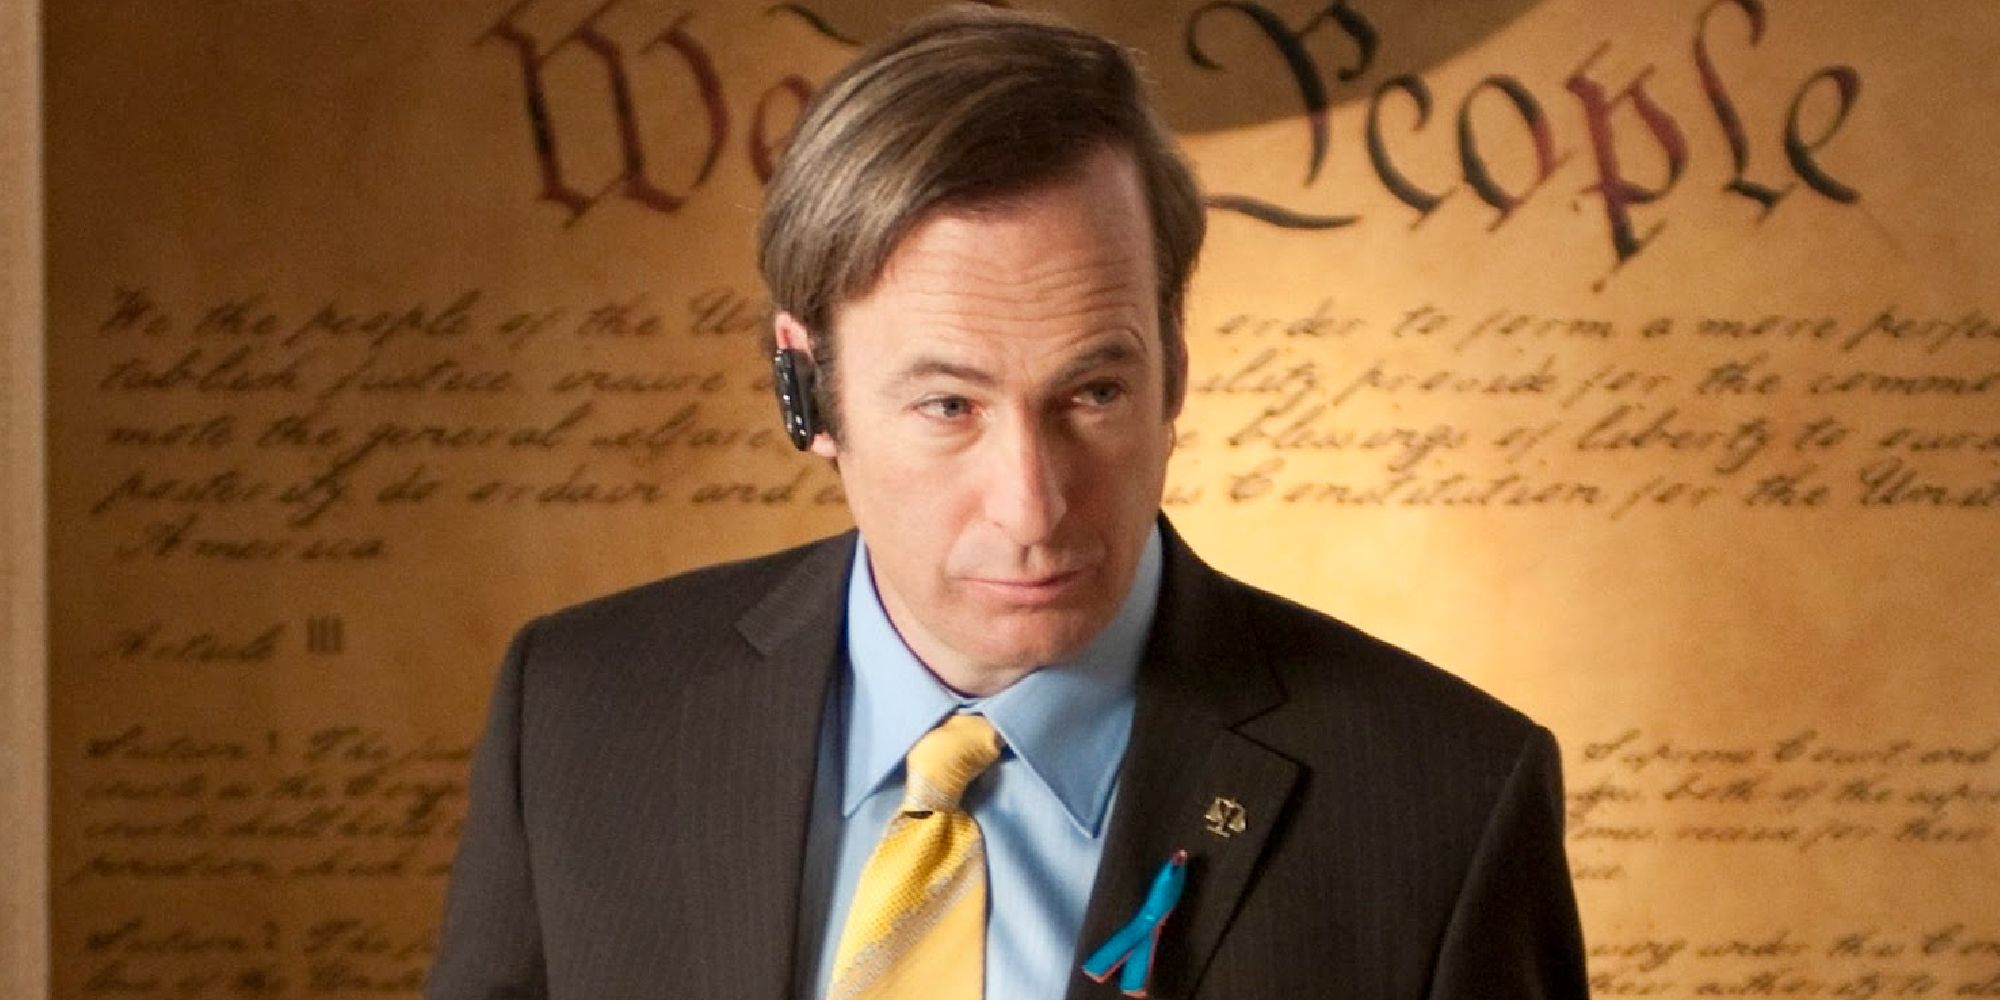 Saul Goodman with his bluetooth speaker in his office from Breaking Bad